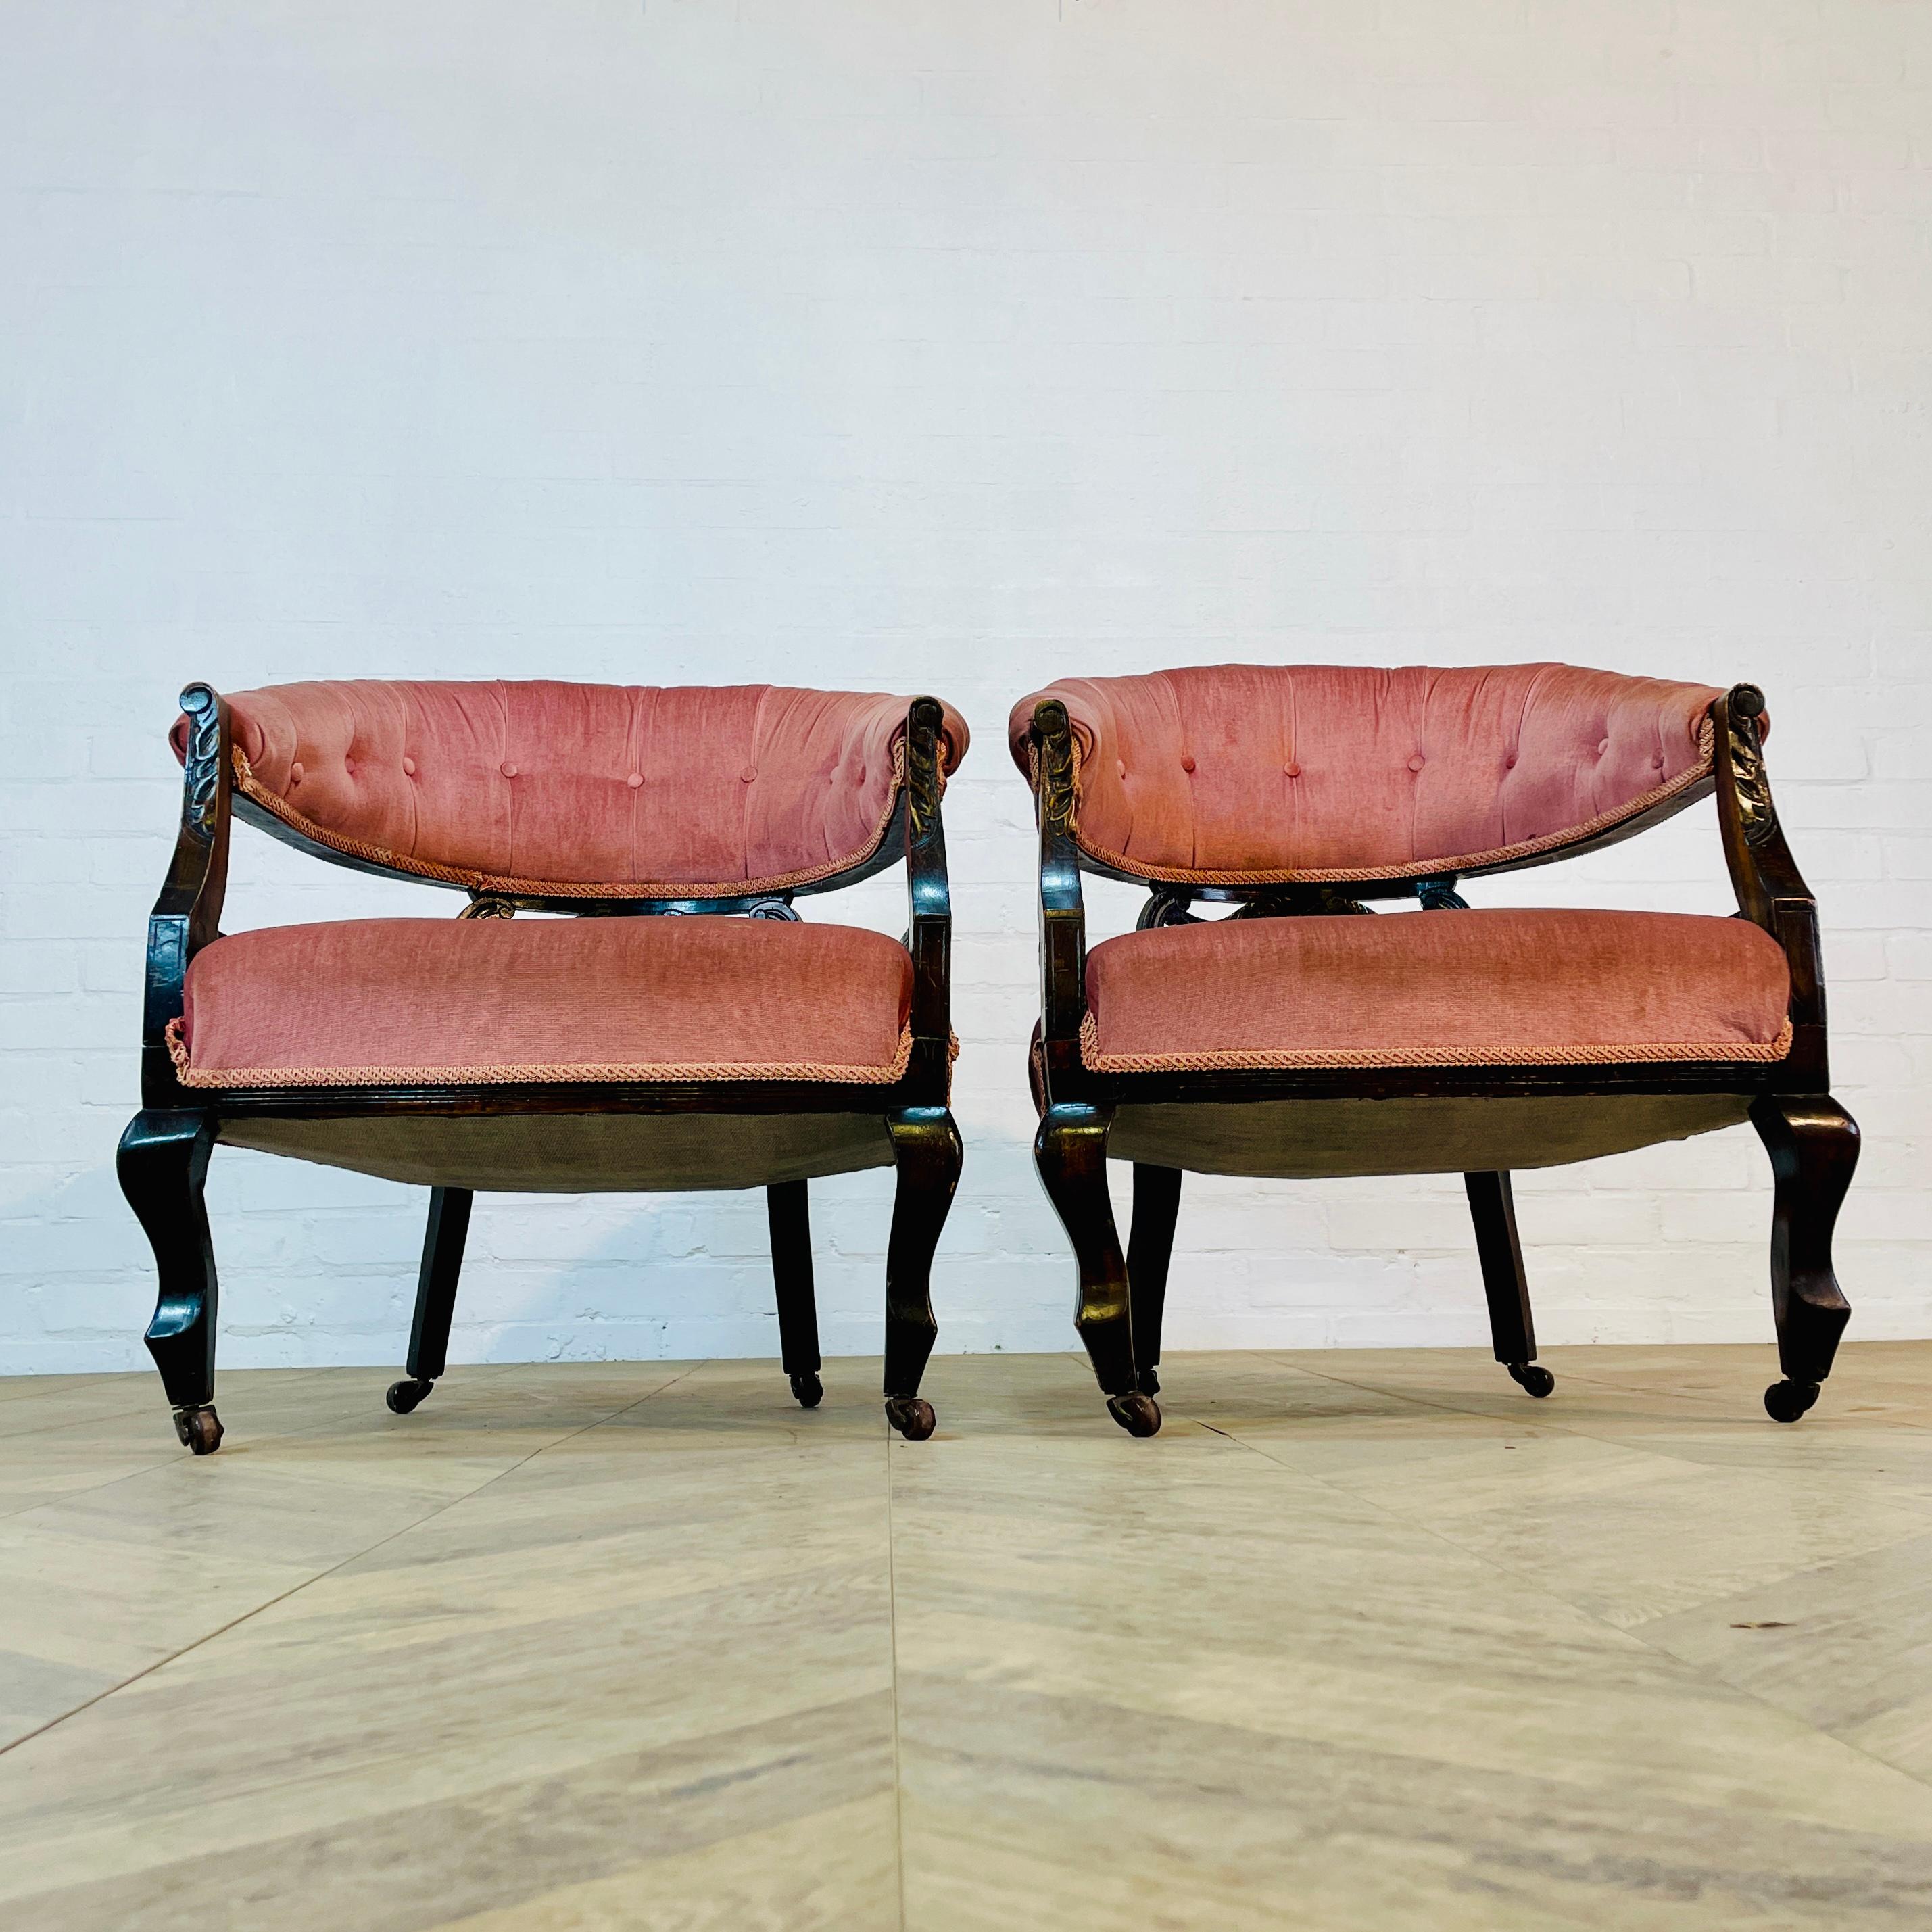 Antique English Edwardian Low Open Armchairs, Set of 2, circa 1900s For Sale 3